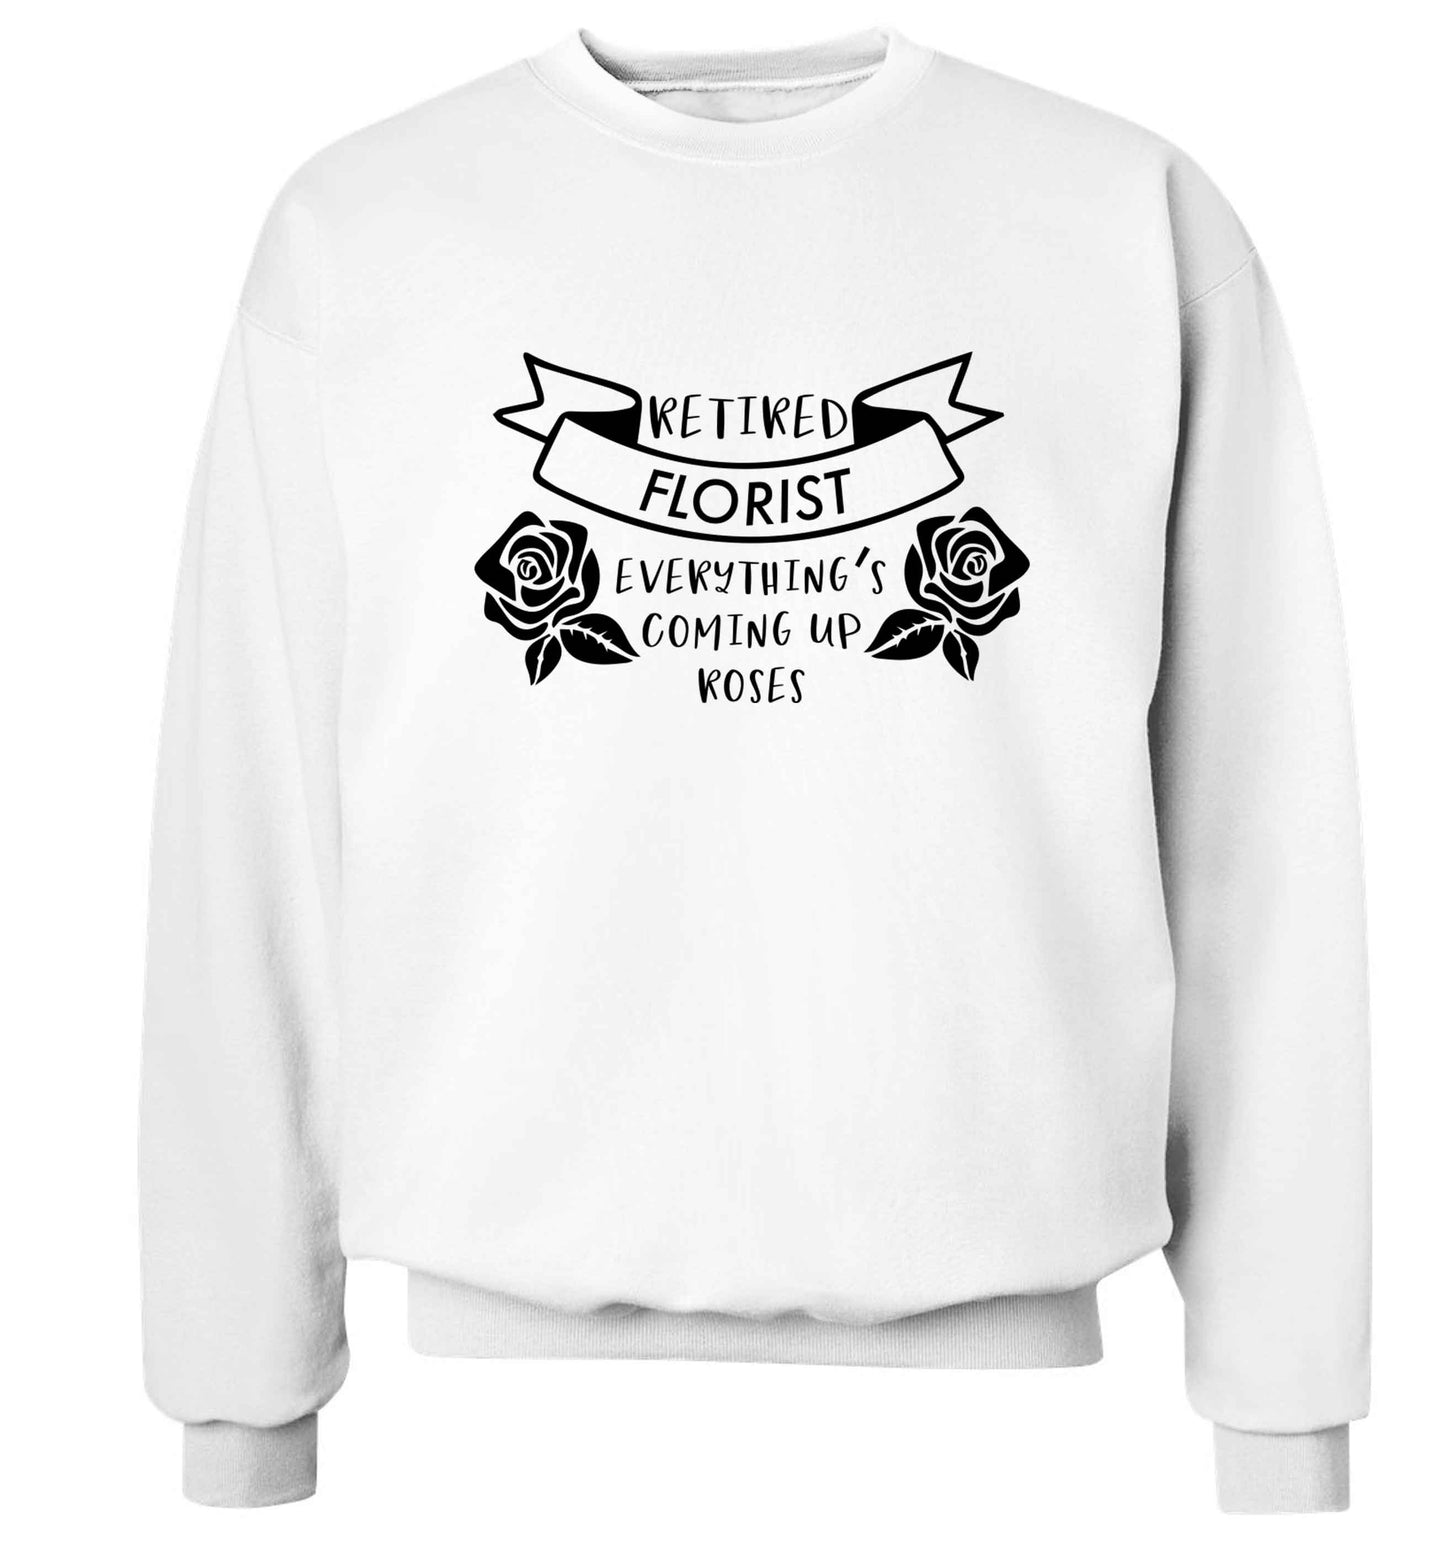 Retired florist everything's coming up roses Adult's unisex white Sweater 2XL